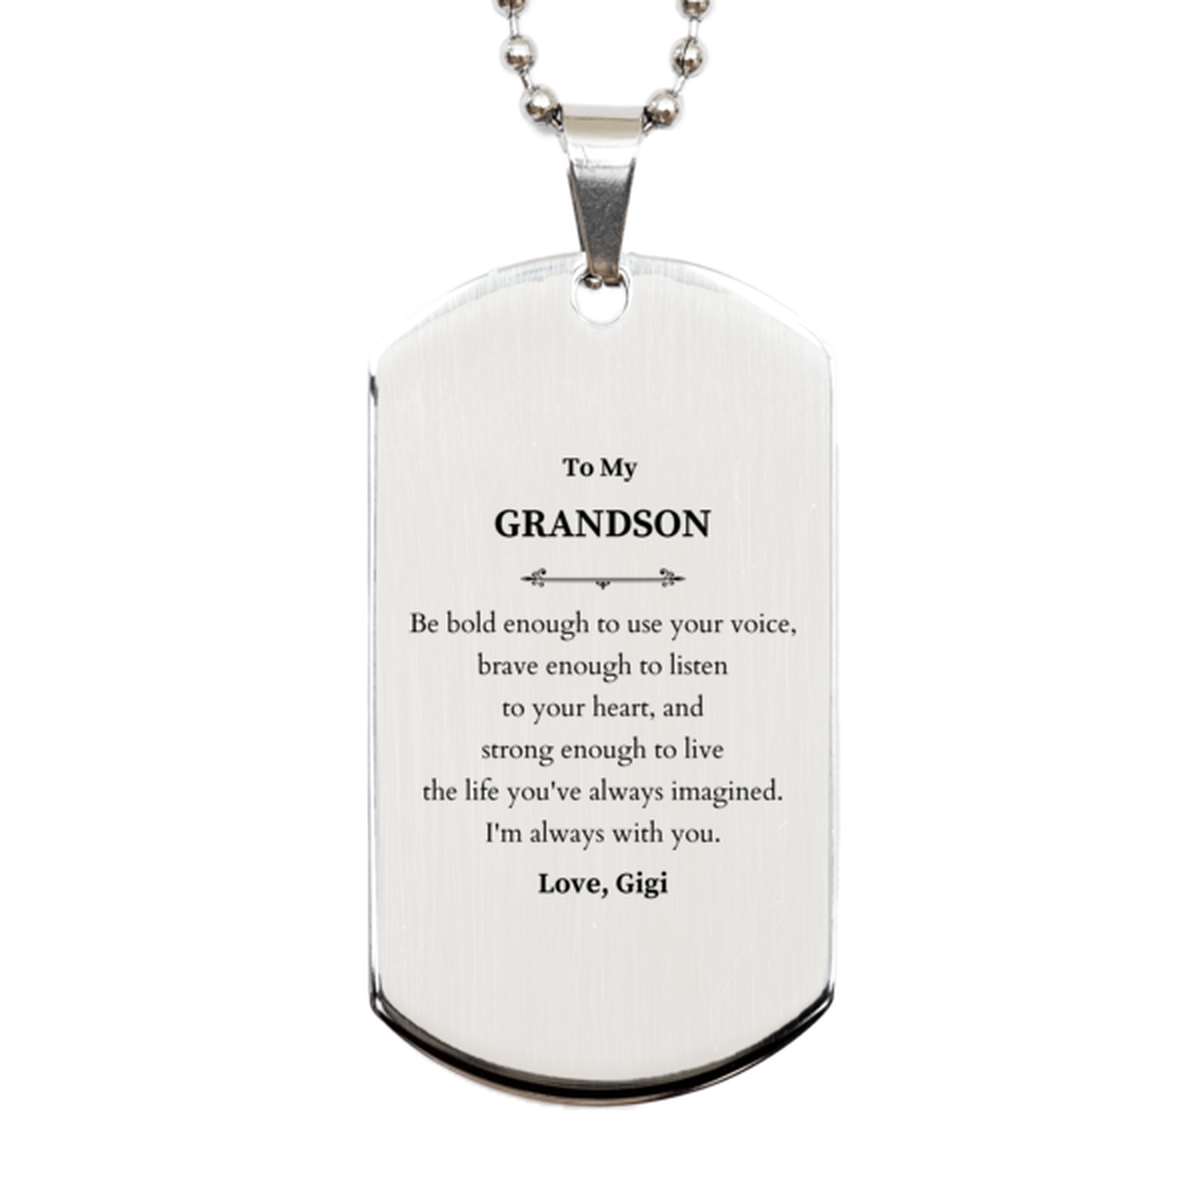 Keepsake Grandson Silver Dog Tag Gift Idea Graduation Christmas Birthday Grandson from Gigi, Grandson Be bold enough to use your voice, brave enough to listen to your heart. Love, Gigi